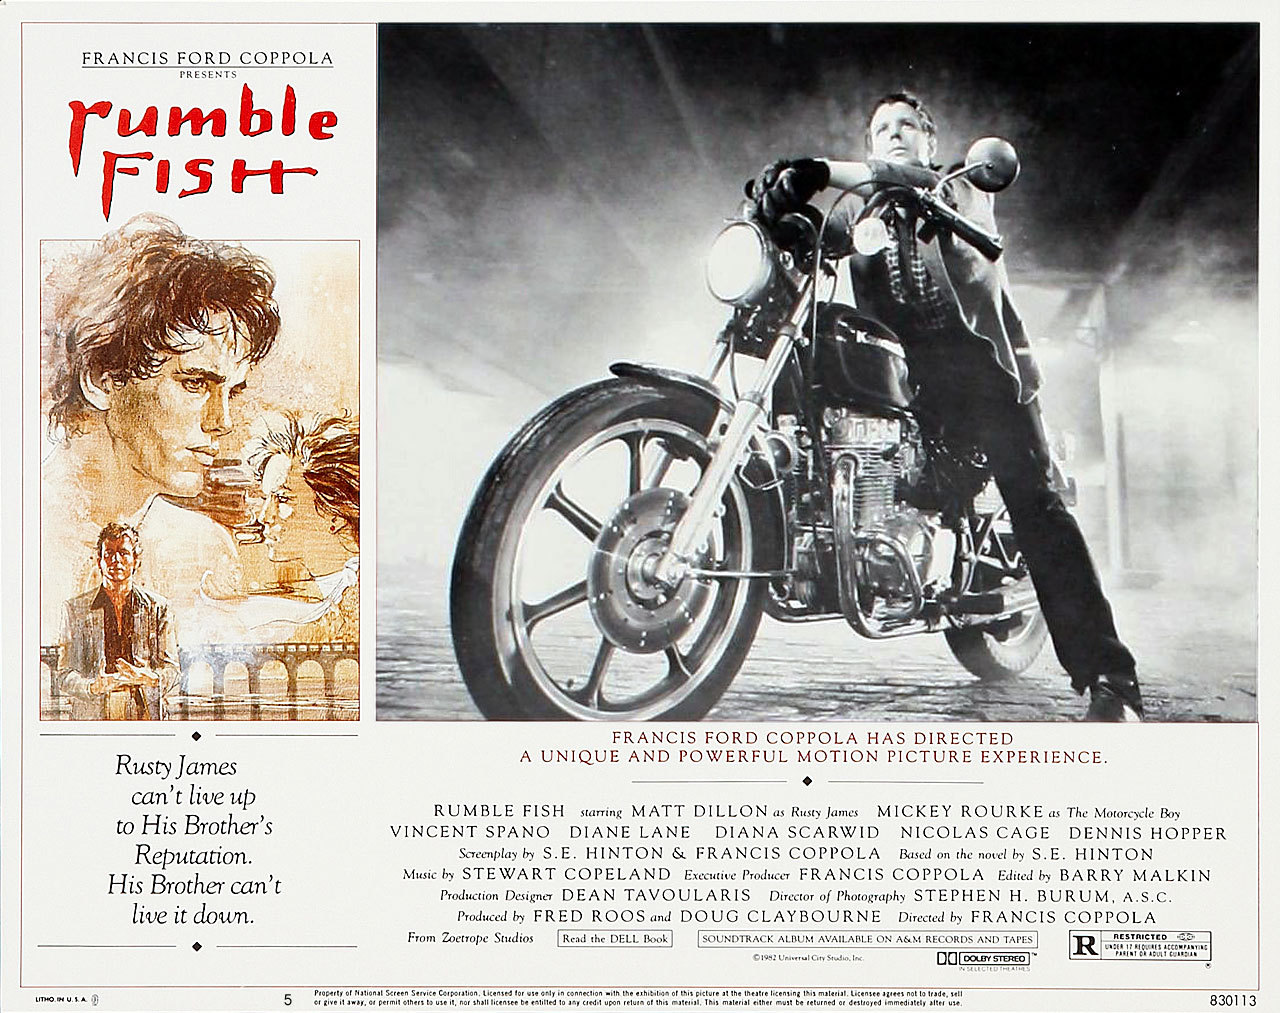 Rumble Fish, US lobby card. 1983
“What’s this? Another glorious battle for the kingdom?” -The Motocycle Boy.